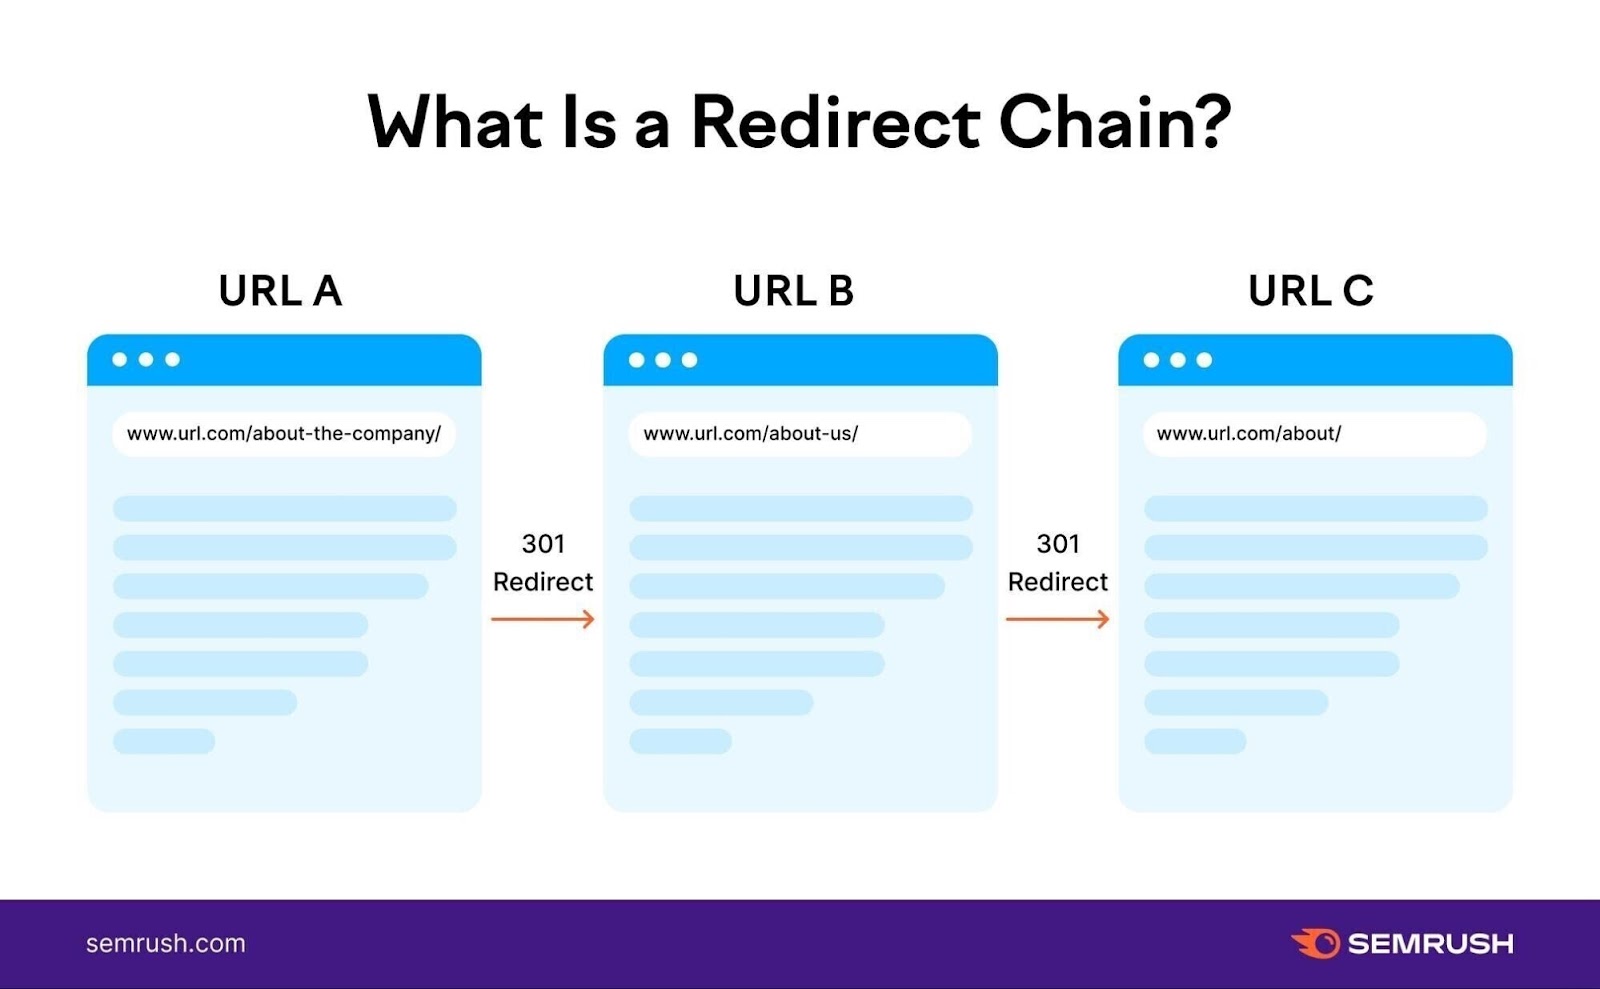 Redirect chain is created when an internal link leads to page that redirects to another